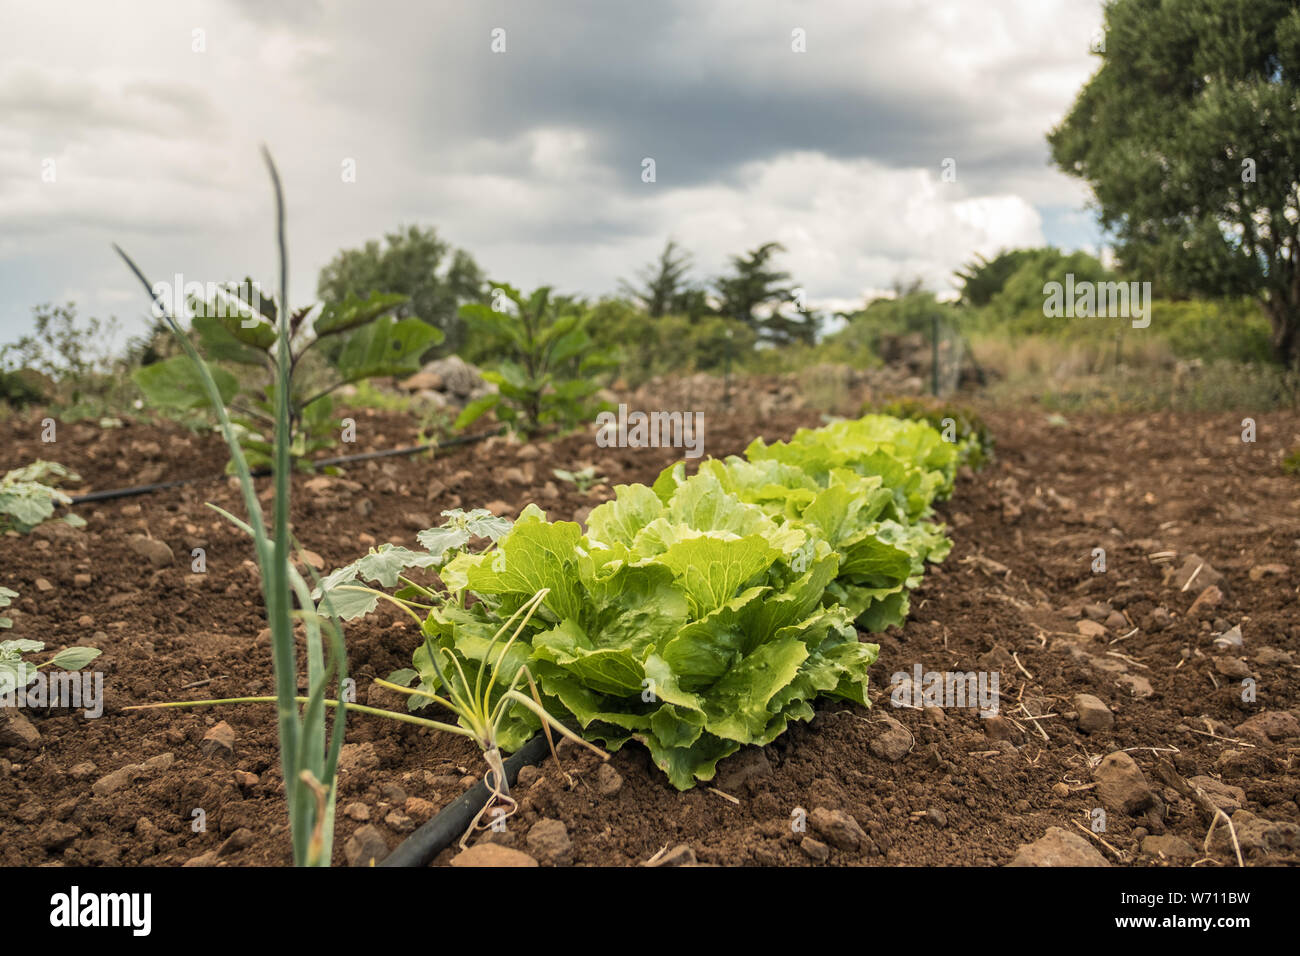 Vegetable garden. Row of fresh lettuces. Agriculture Stock Photo